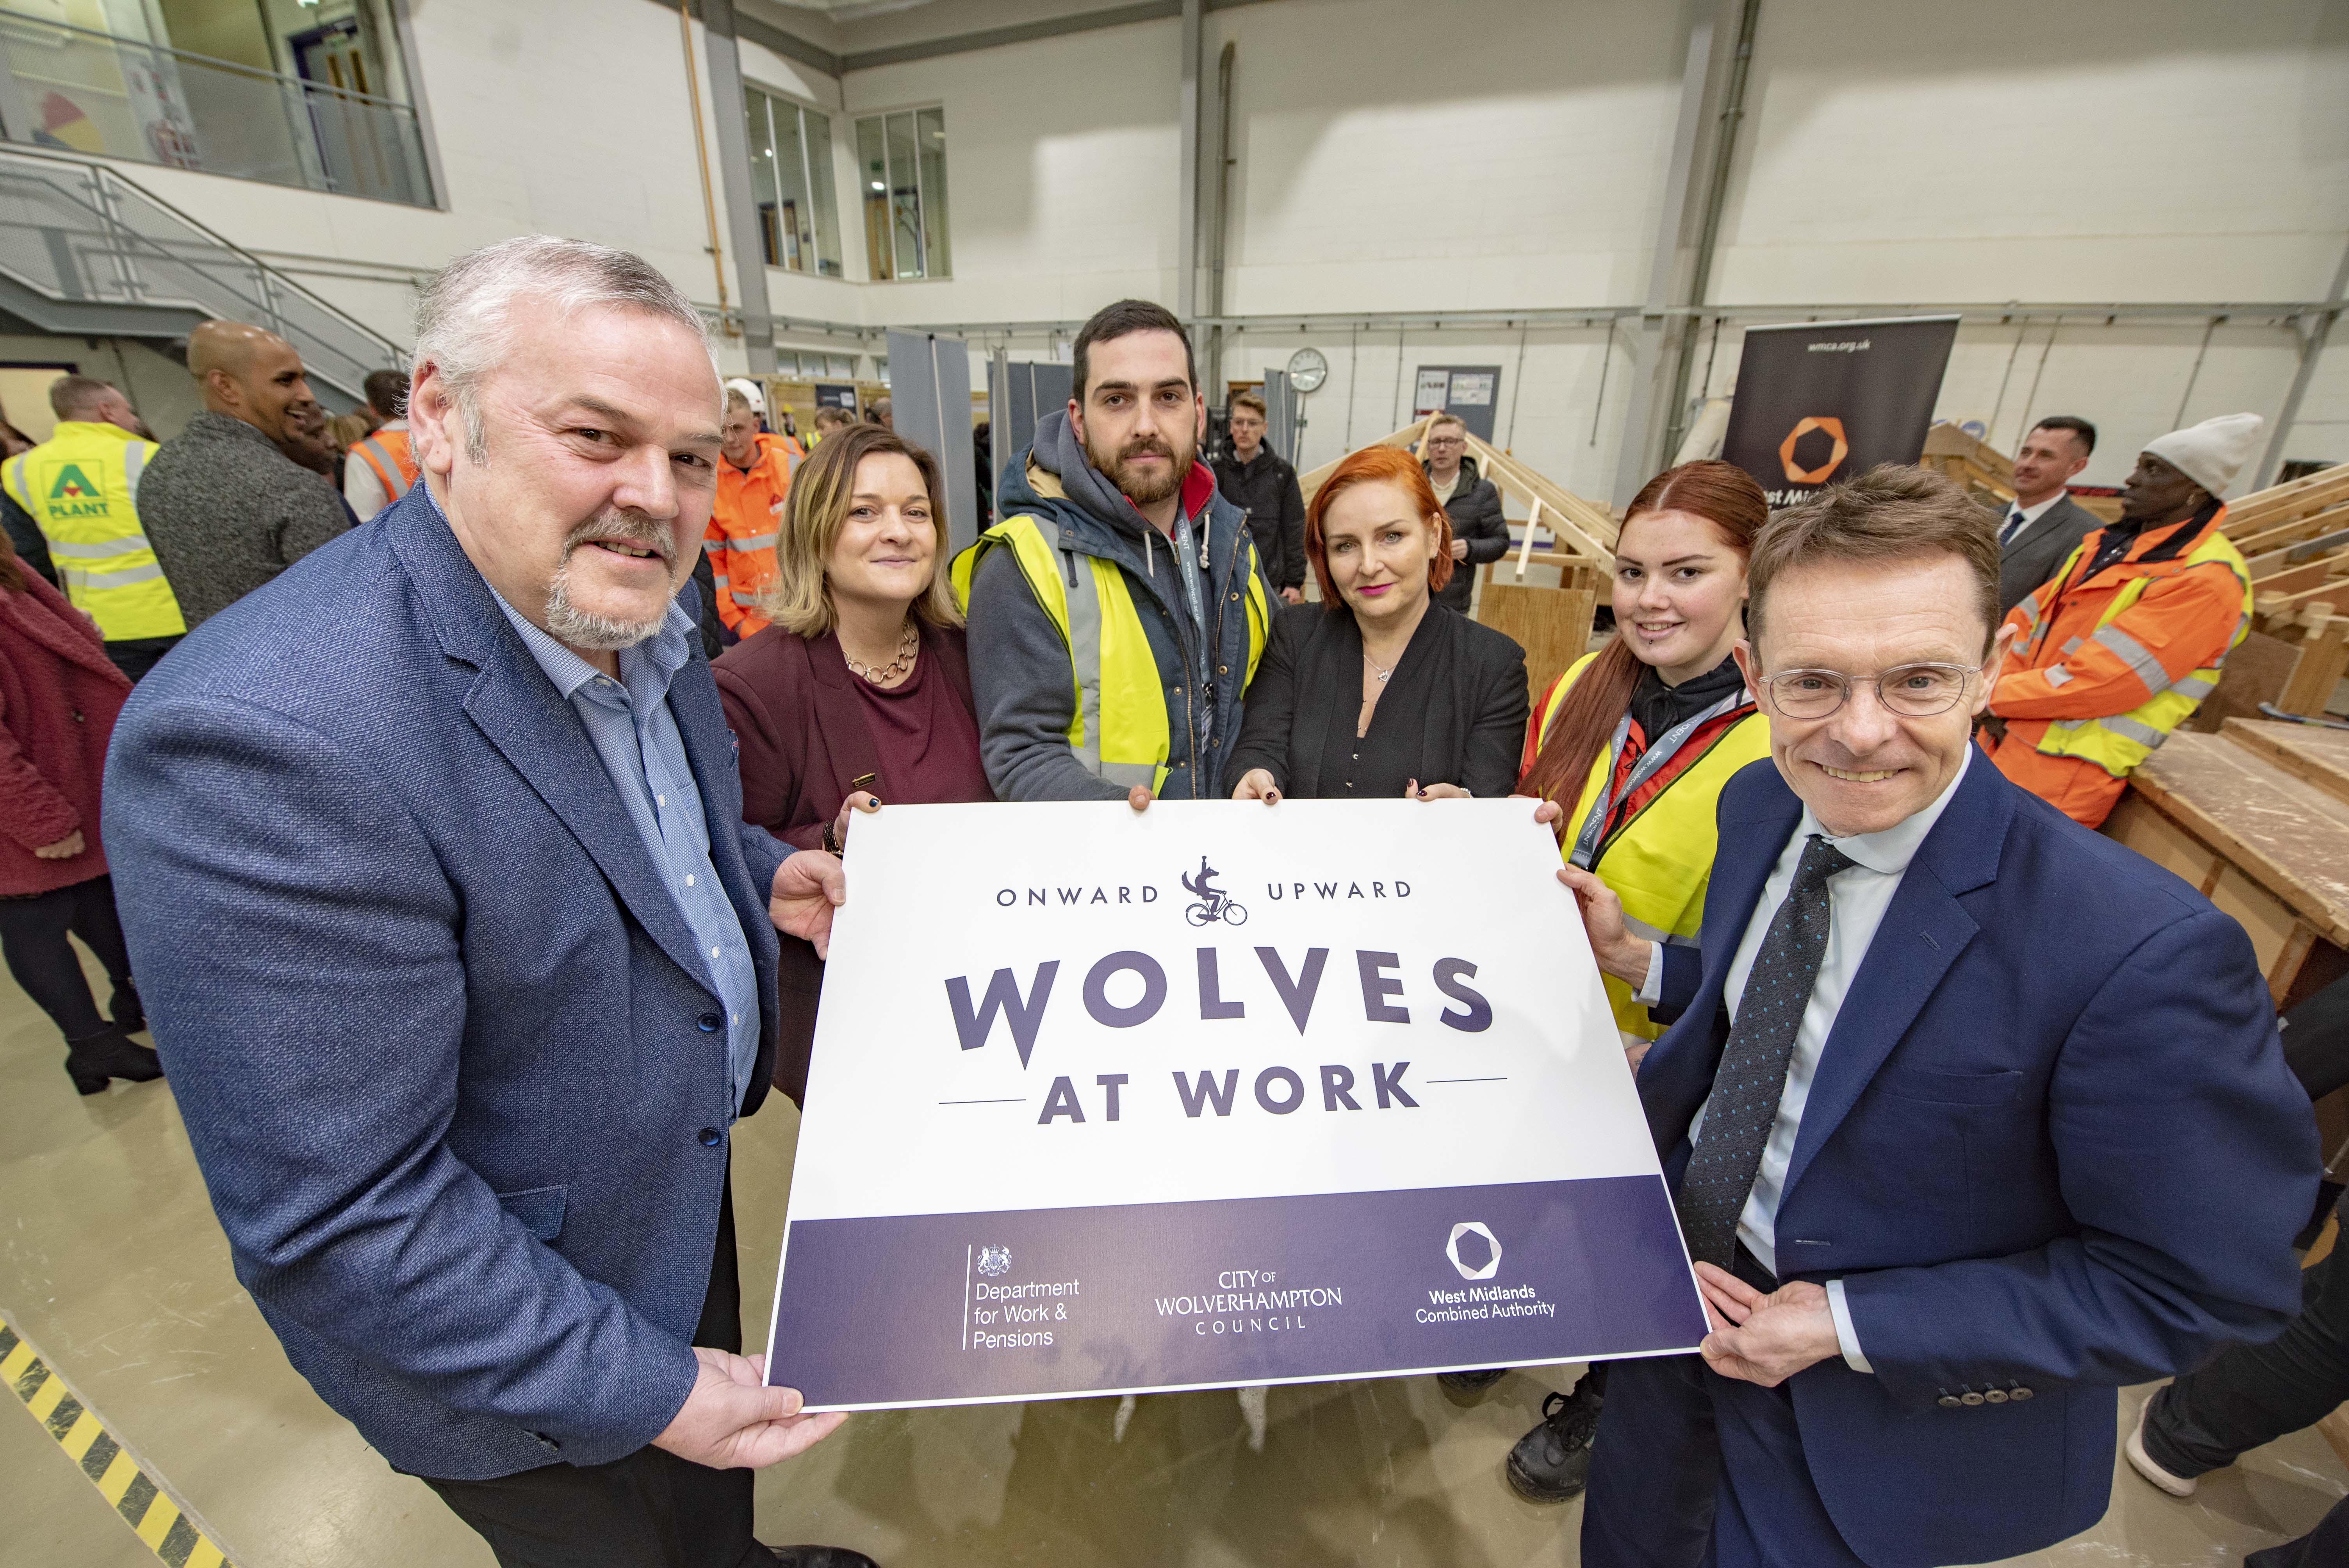 L-R City of Wolverhampton Council Leader, Cllr Ian Brookfield, WMCA Head of Skills Delivery, Clare Hatton, WMCA Director of Productivity and Skills, Julie Nugent, and Mayor of the West Midlands, Andy Street, plus, in hi-vis vests, Construction Gateway participants Adam Cain, 30, and Victoria Hinton, 22, who are being supported by Wolves at Work at City of Wolverhampton College